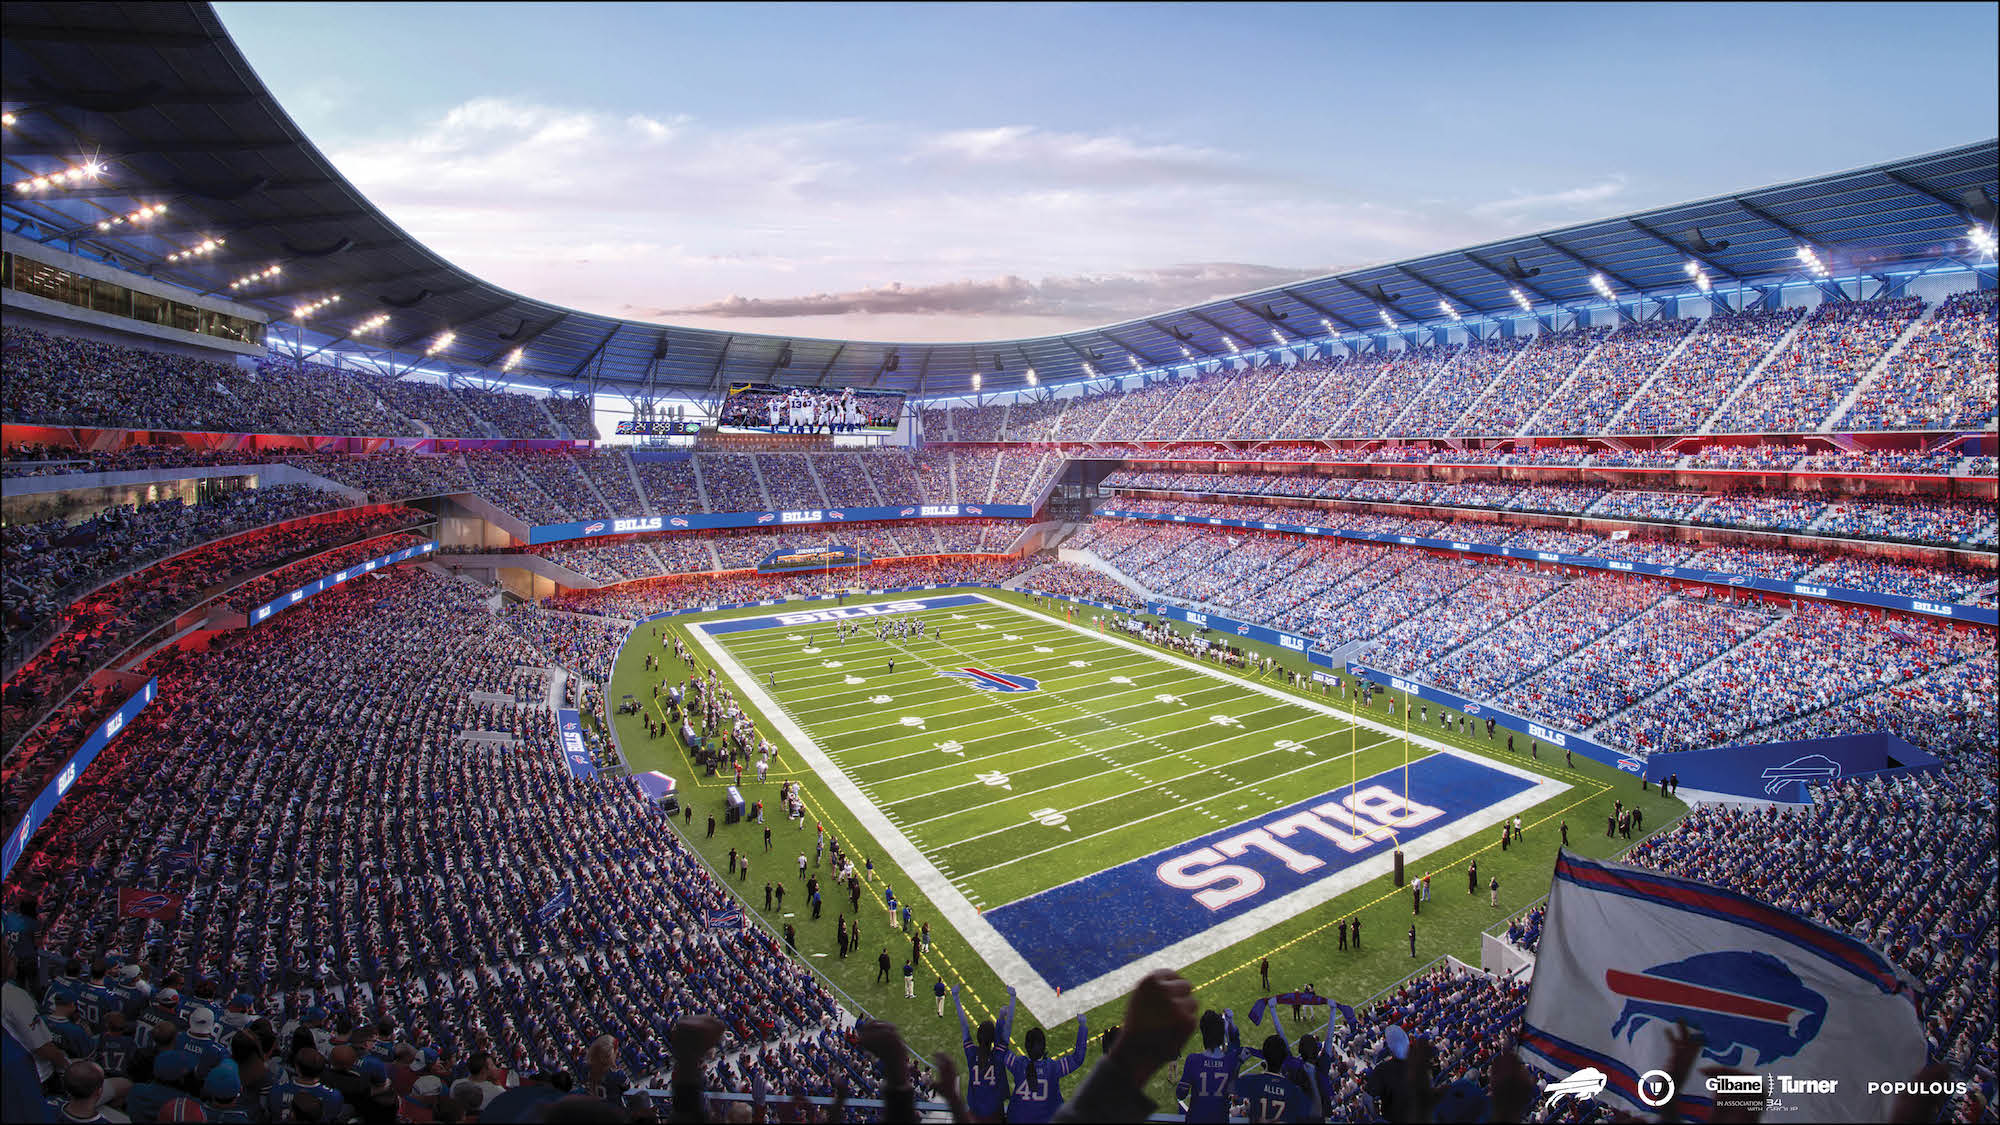 Gilbane Turner Populous Tapped To Design And Build New Buffalo Bills Stadium 7838